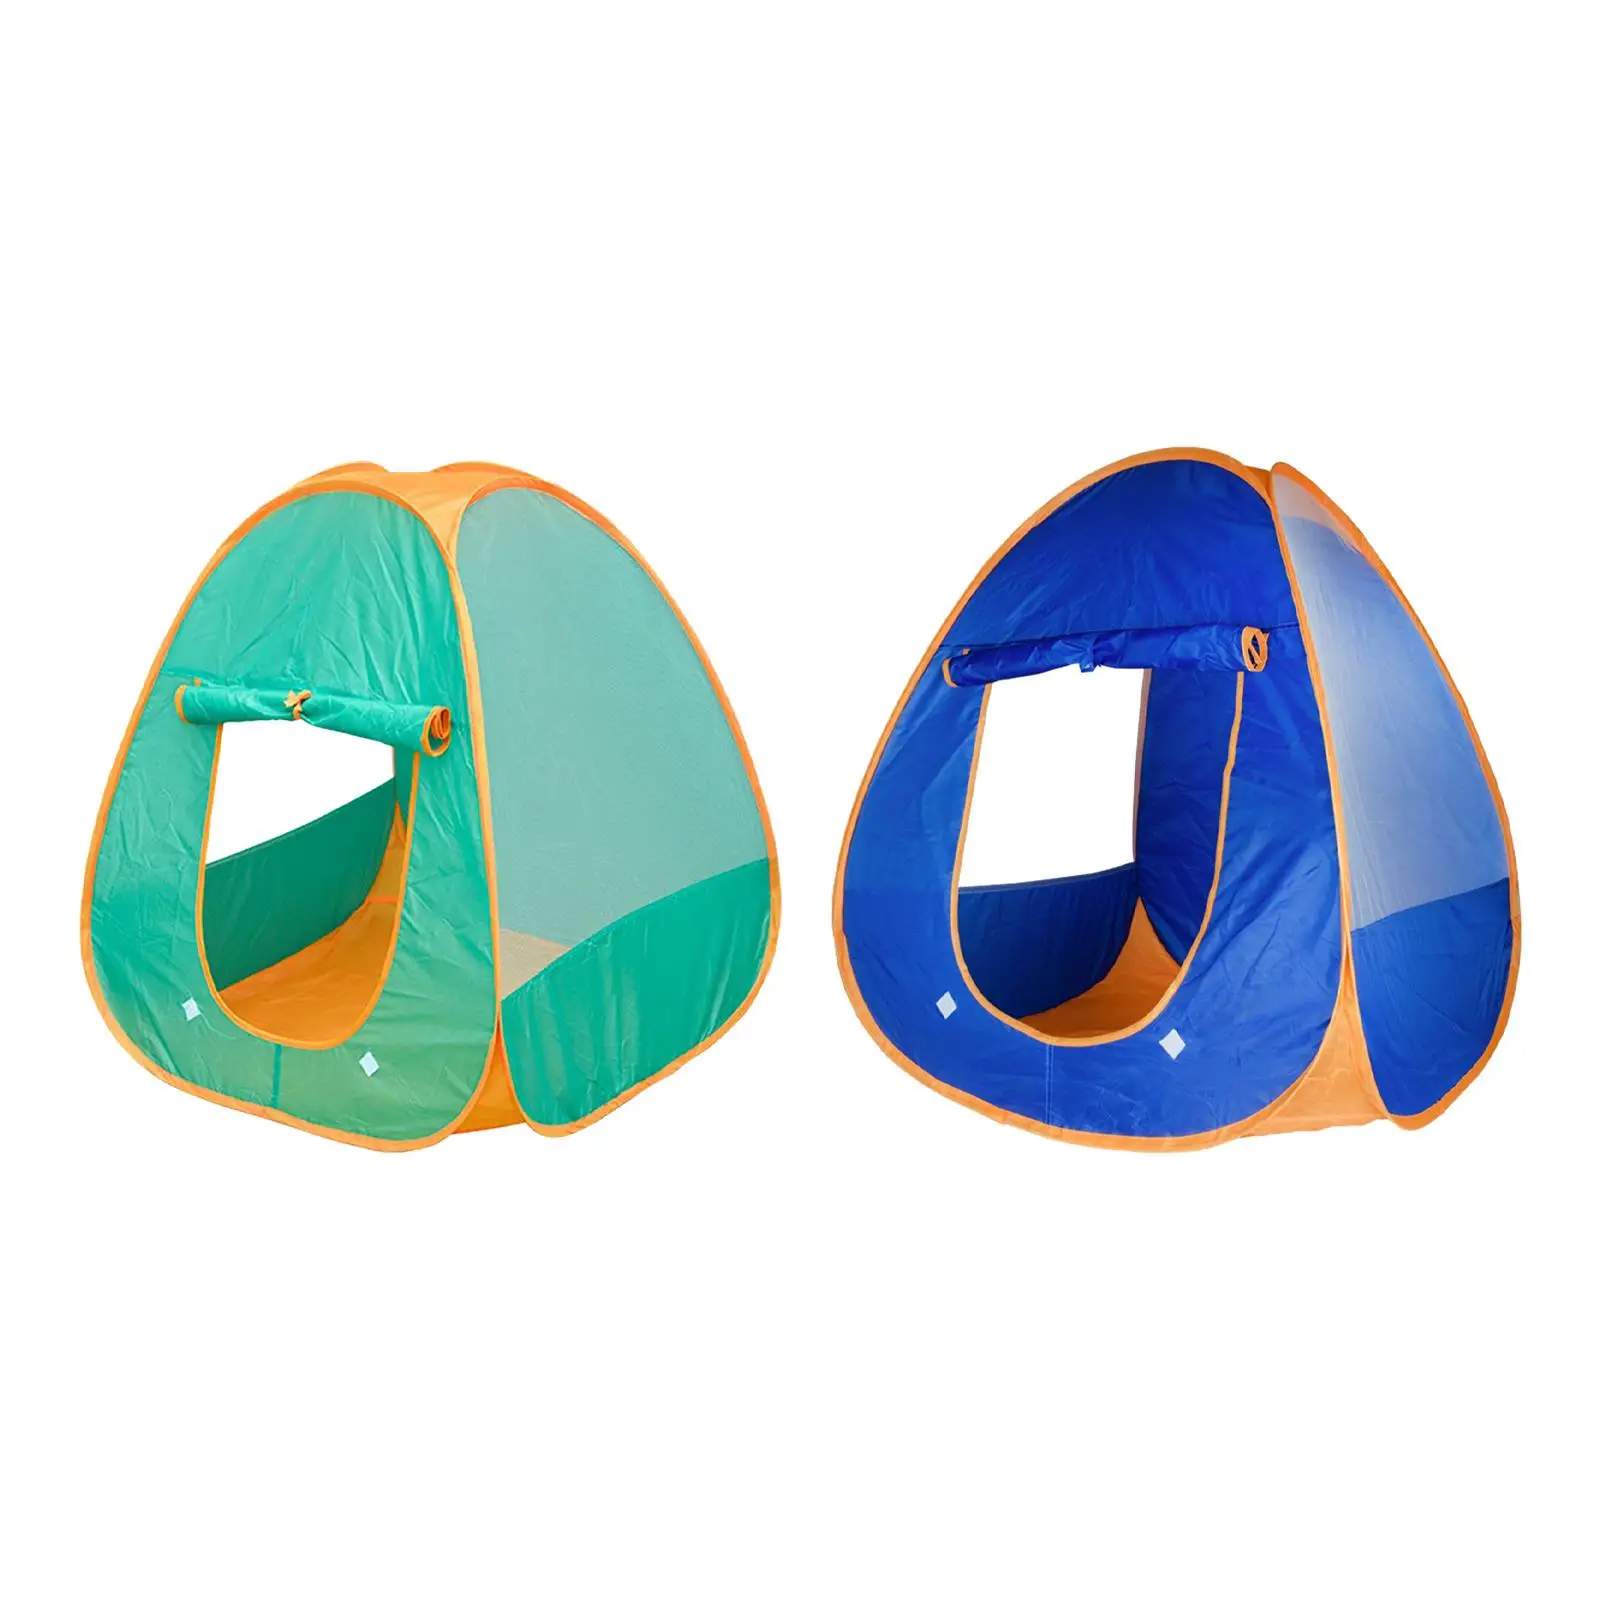 Kids Play Tent Collapsible Lightweight Play Mat for Girls Boys Child Room Decoration for Beach Game Parties Indoor Outdoor